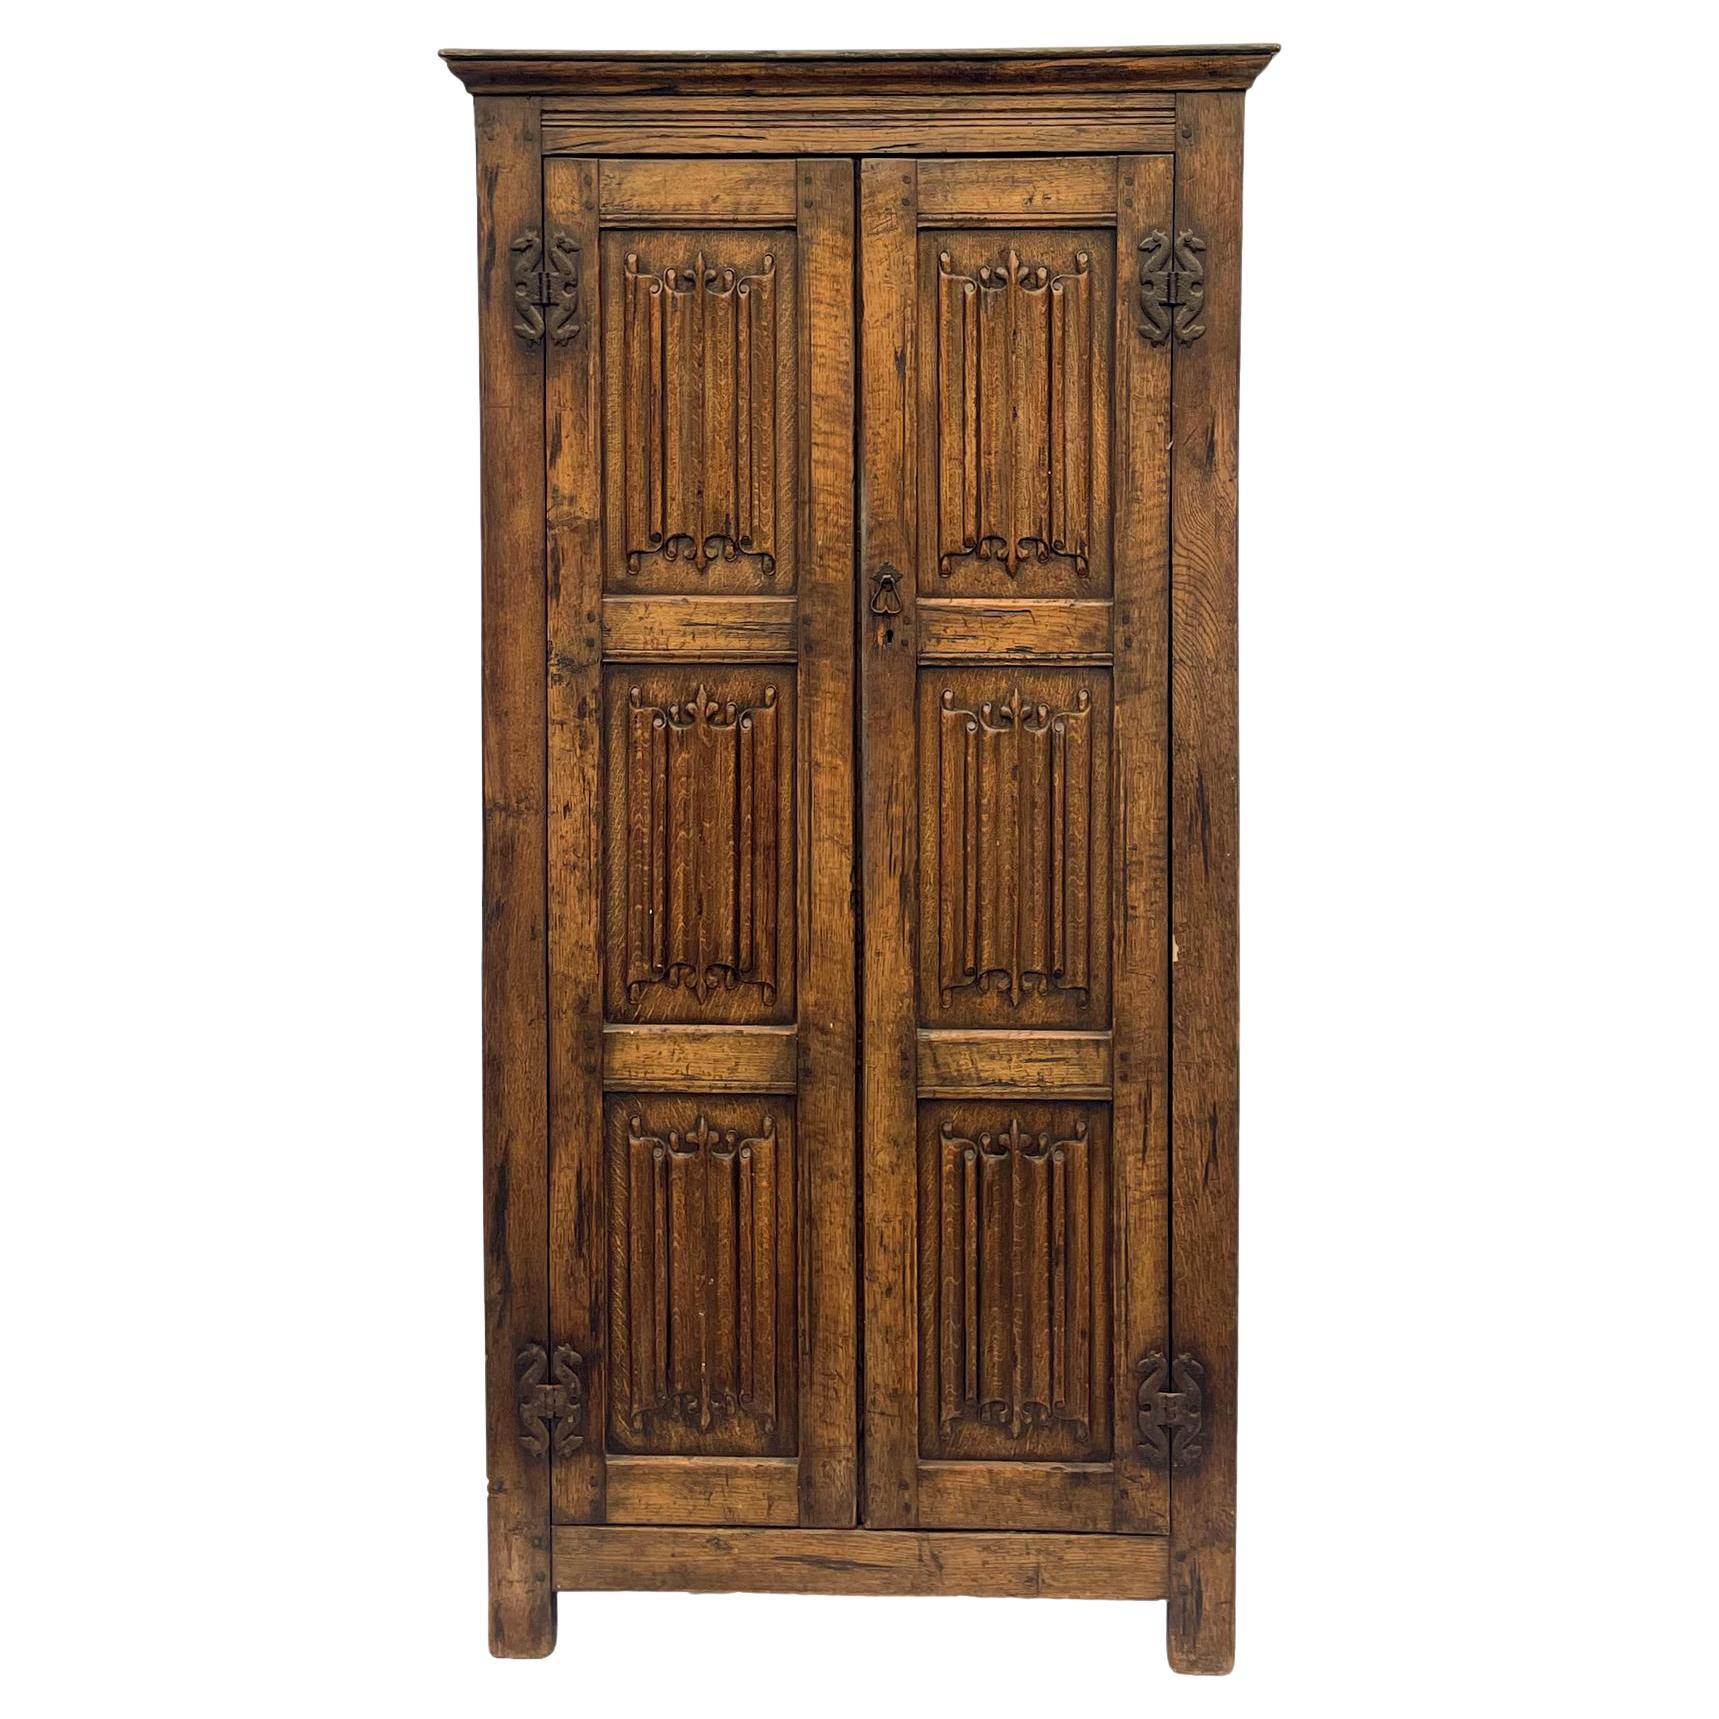 Solid Oak Wardrobe with Hand Carved Linenfold Panels, English, circa 1900